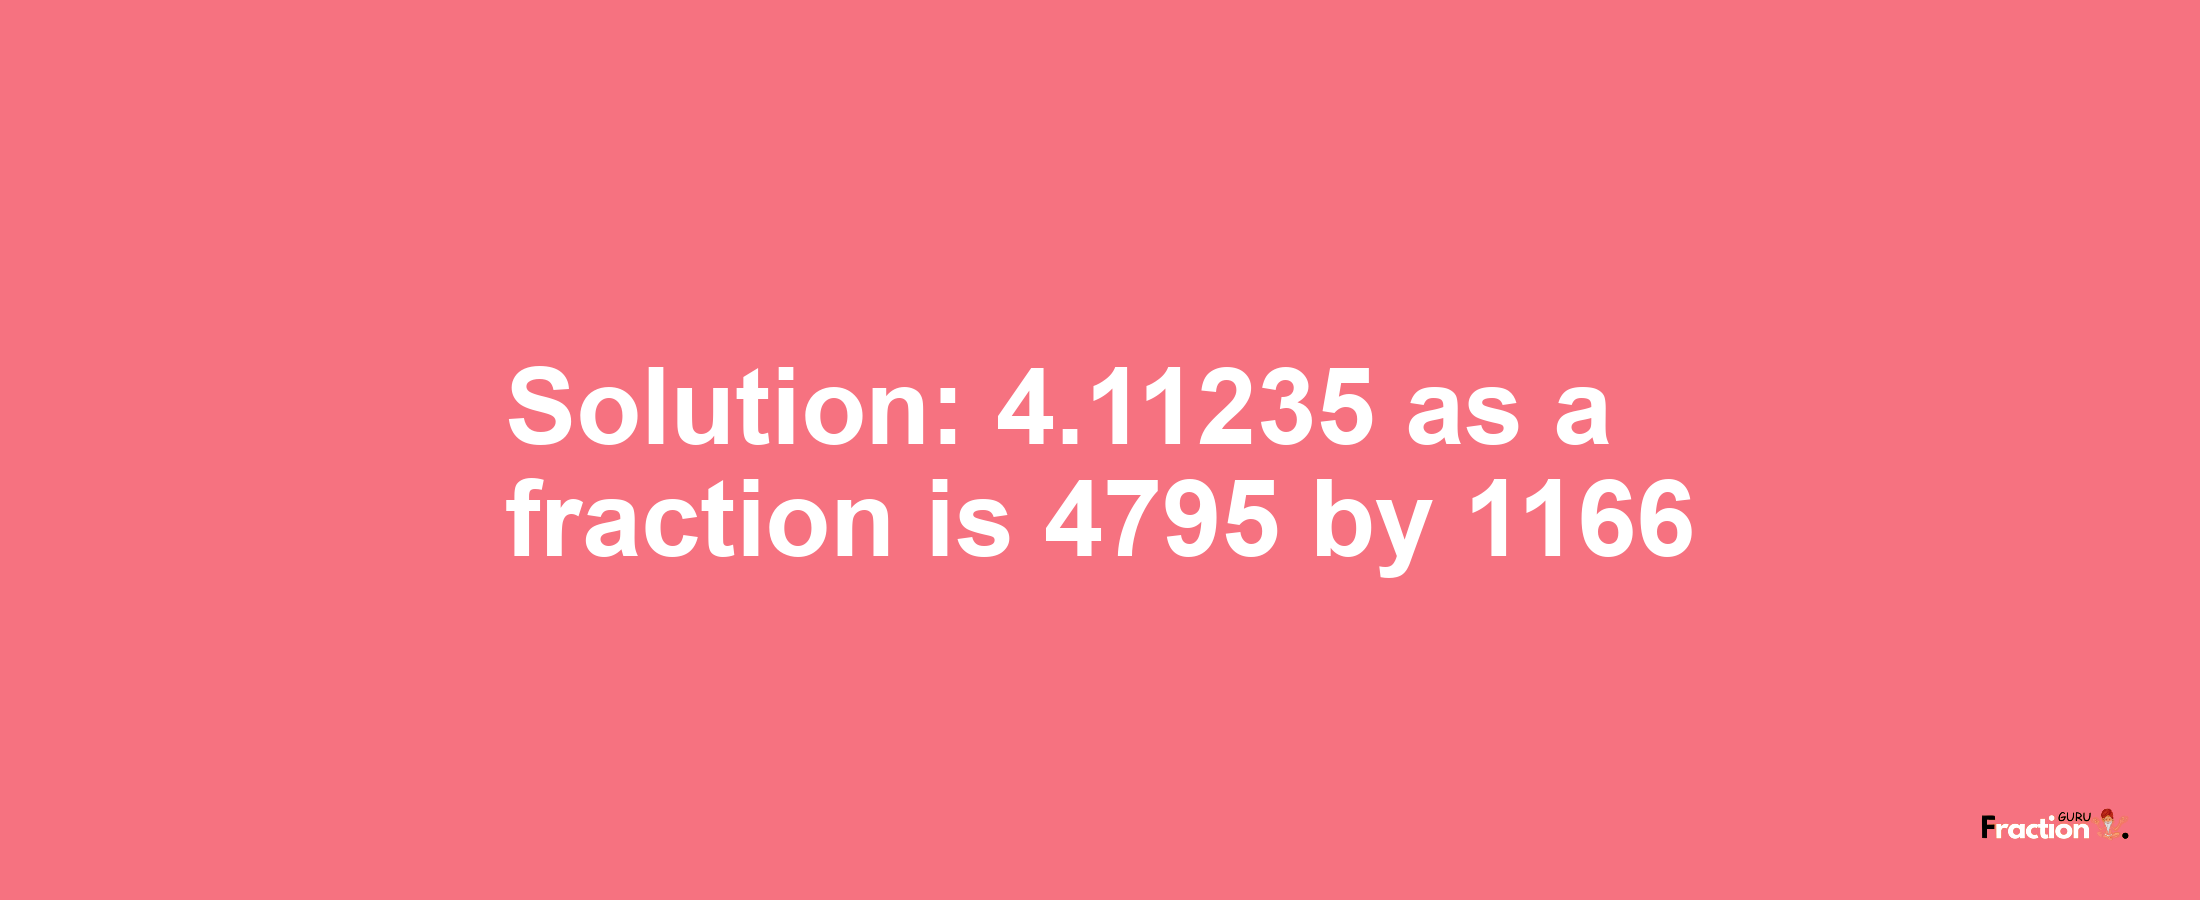 Solution:4.11235 as a fraction is 4795/1166